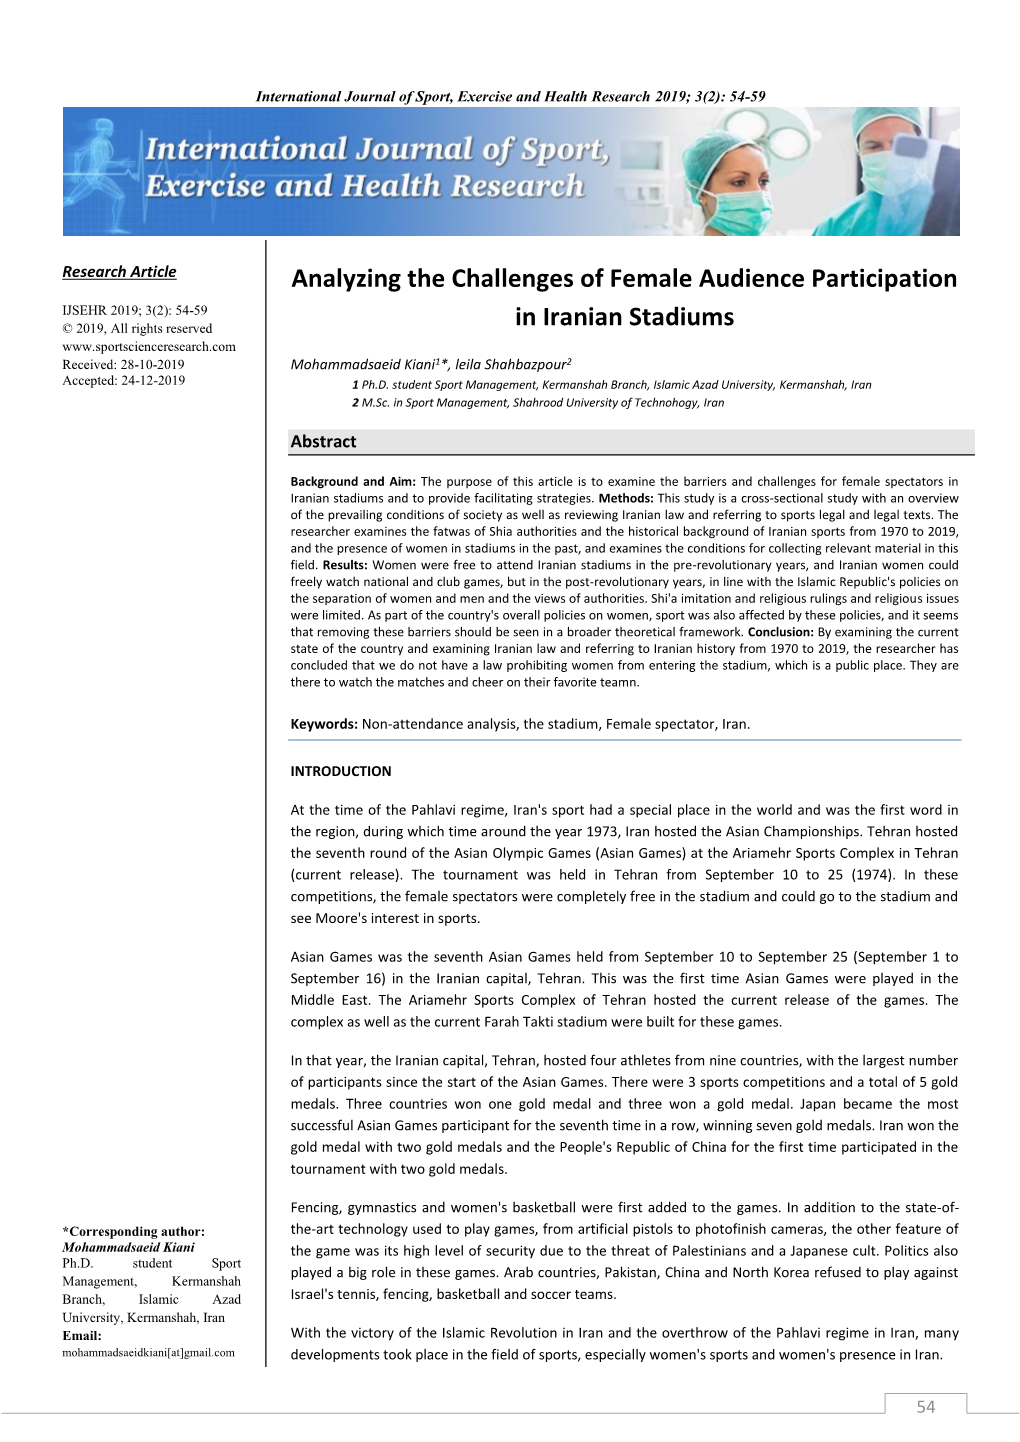 Analyzing the Challenges of Female Audience Participation in Iranian